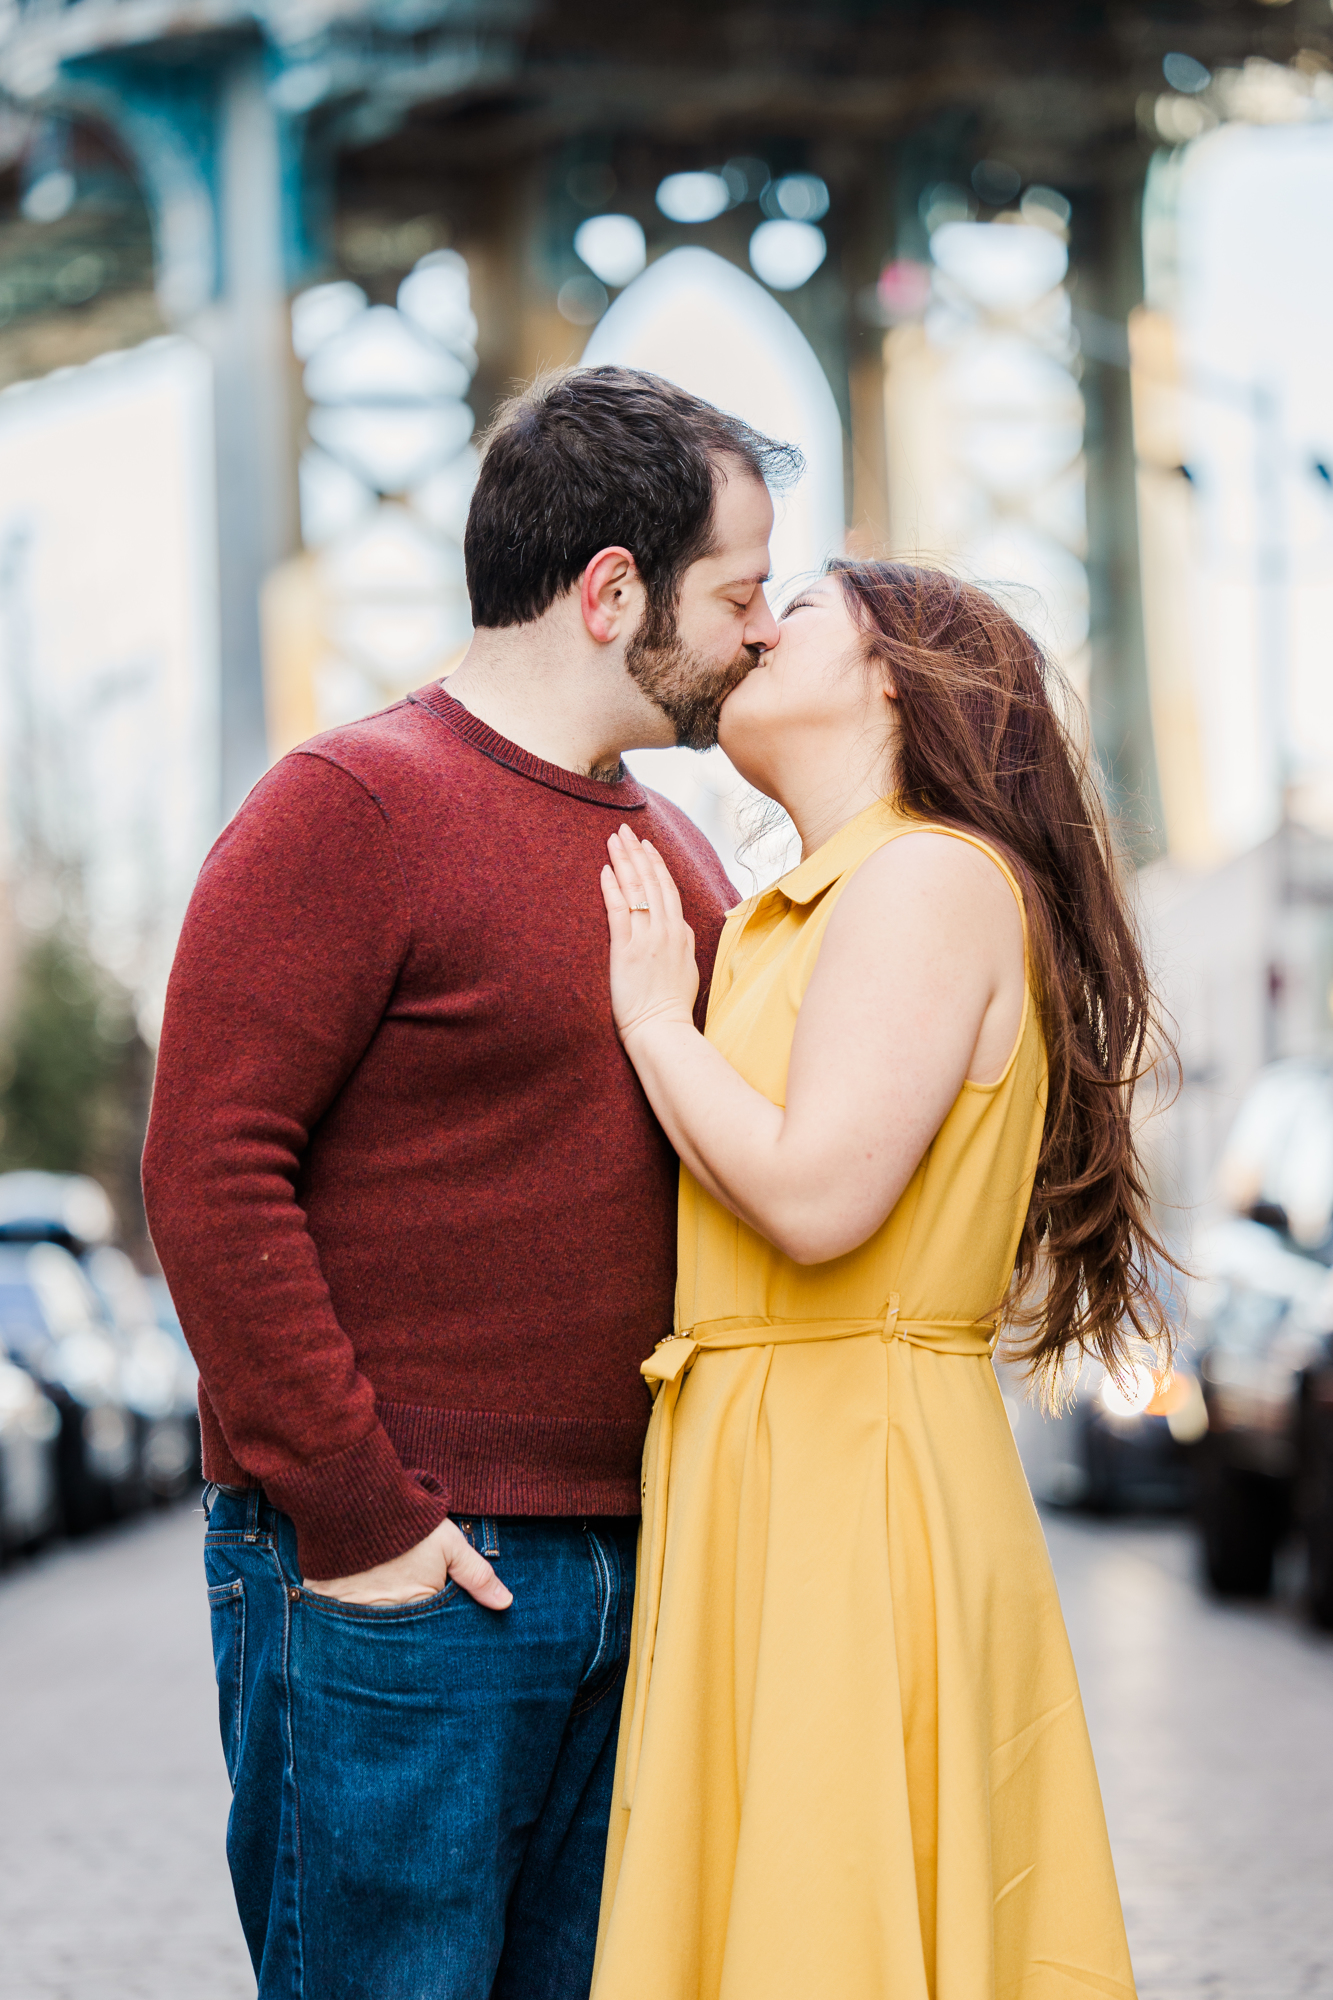 Fabulous Brooklyn Bridge Engagement Photography with Matching Outfits